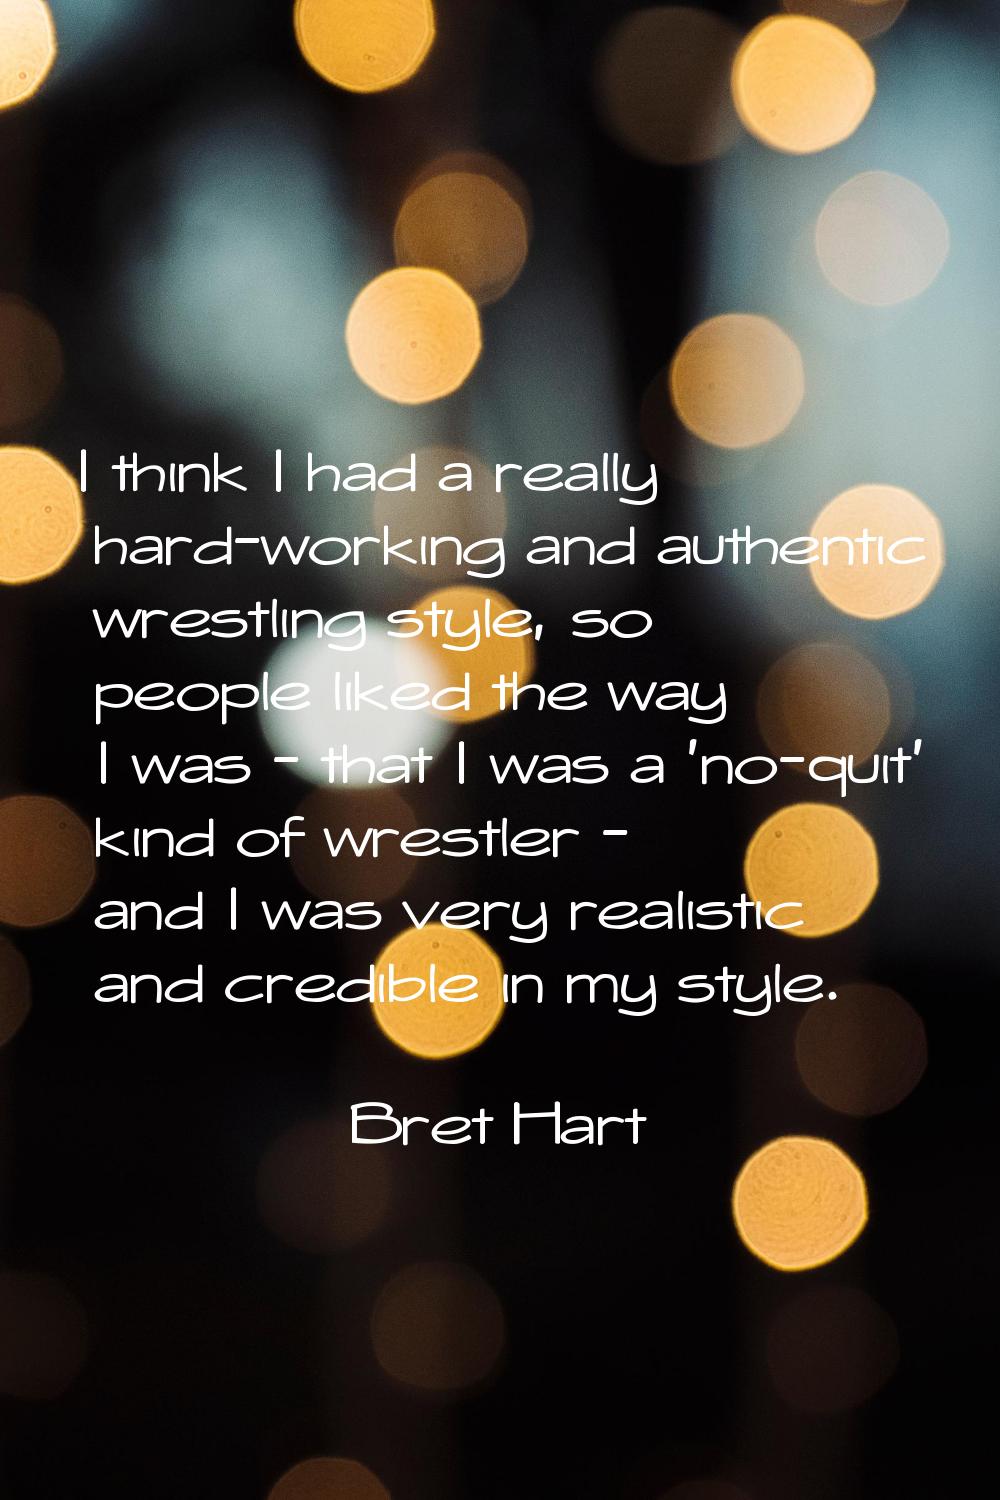 I think I had a really hard-working and authentic wrestling style, so people liked the way I was - 